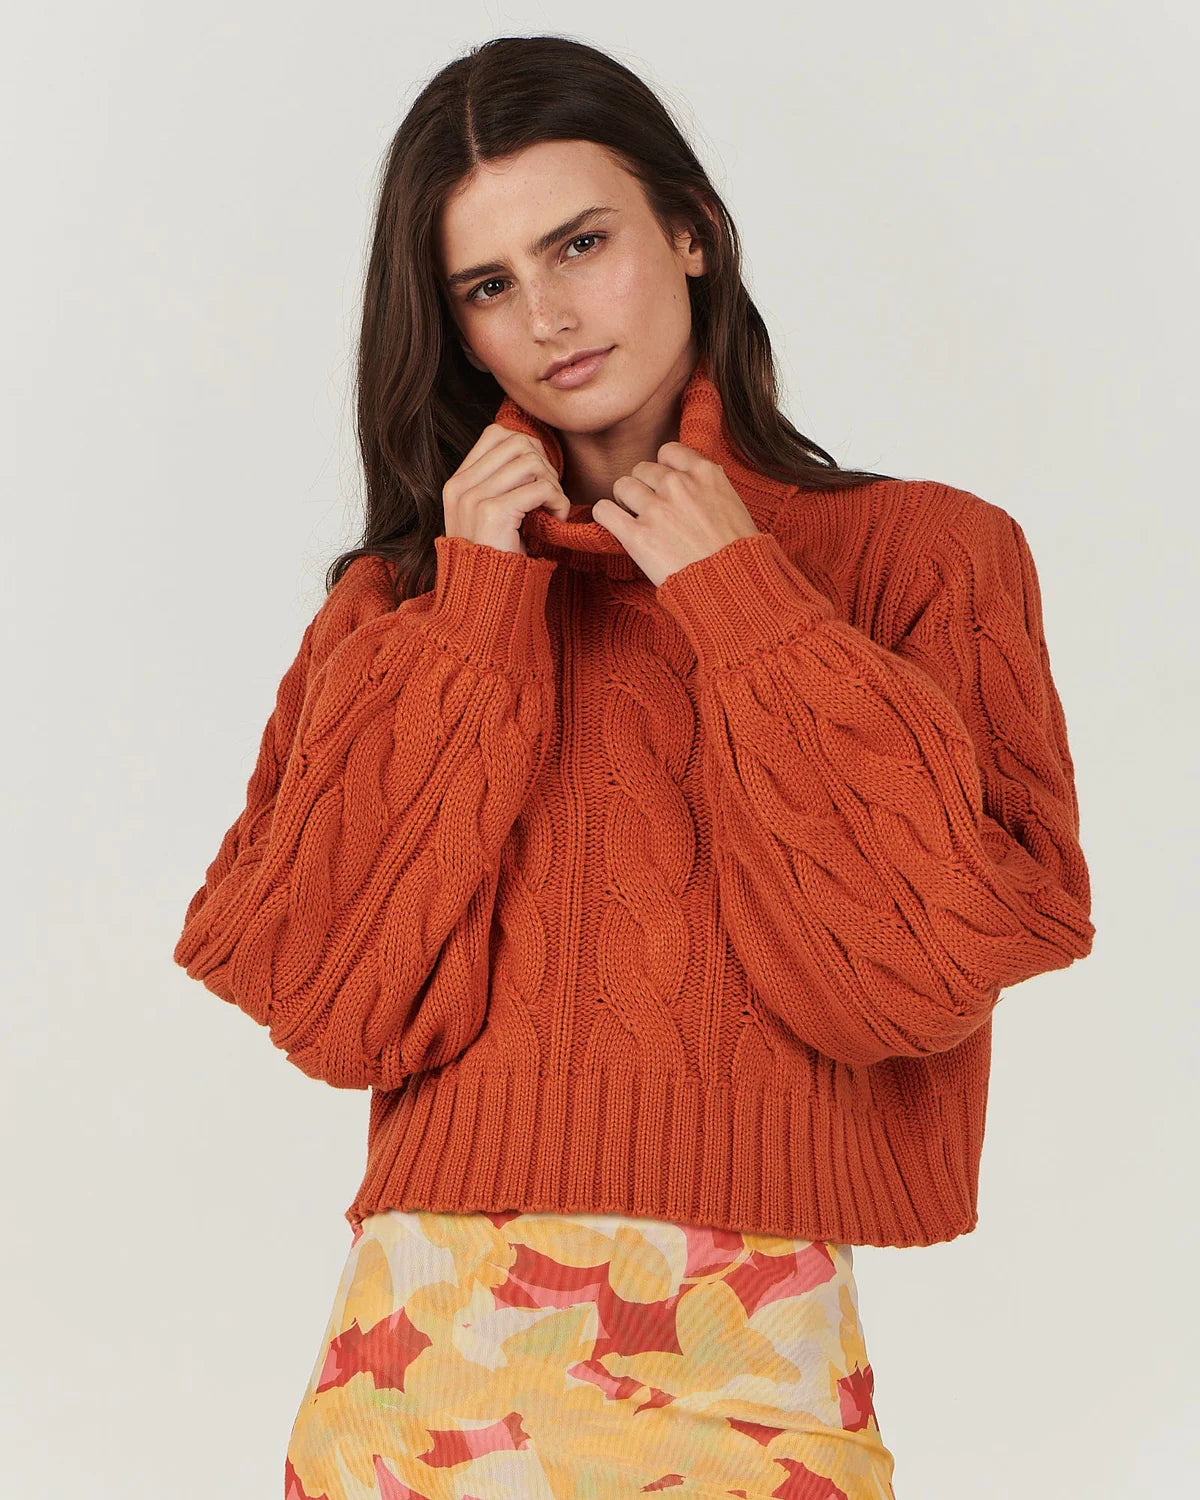 In a warm amber hue, this gorgeous cable knit sweater by Charlie Holiday features a crop body with slouchy blouson sleeves. A beautiful knit you can dress up or down, team it with a floral maxi skirt or with high-waisted jeans and ankle boots.